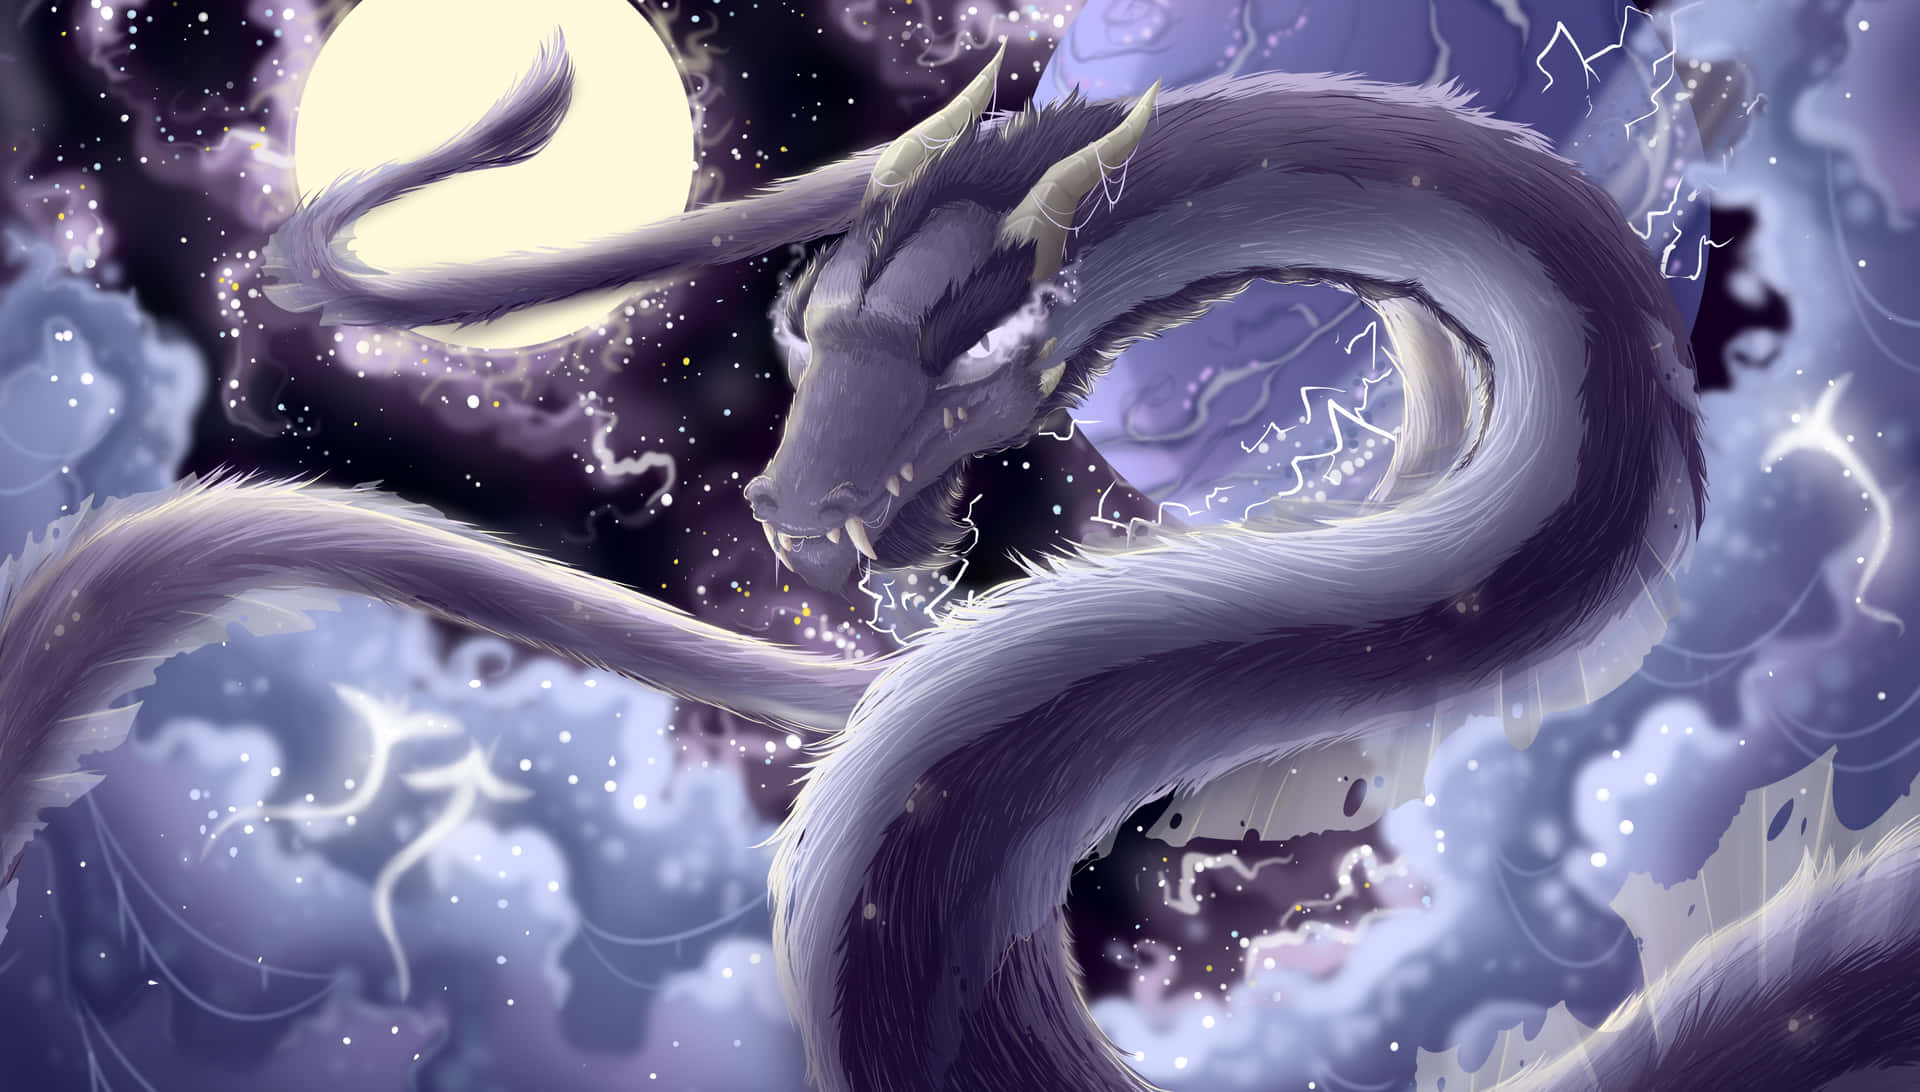 A mysterious dragon hovering through the misty sky Wallpaper